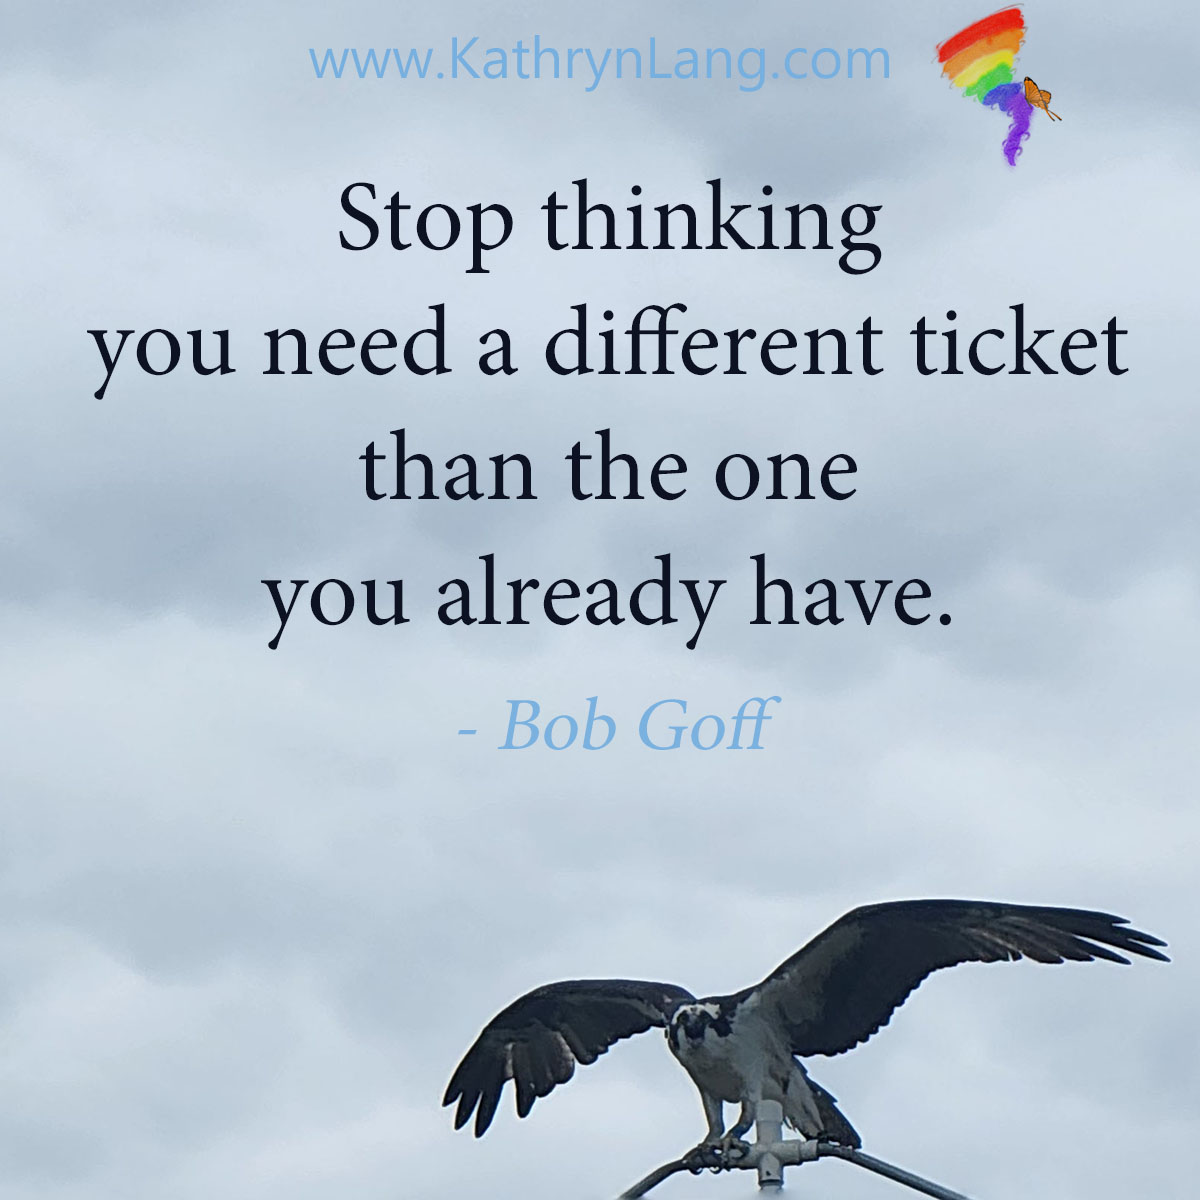 #QuoteoftheDay

Stop thinking 
you need a different ticket 
than the one 
you already have. 
- Bob Goff